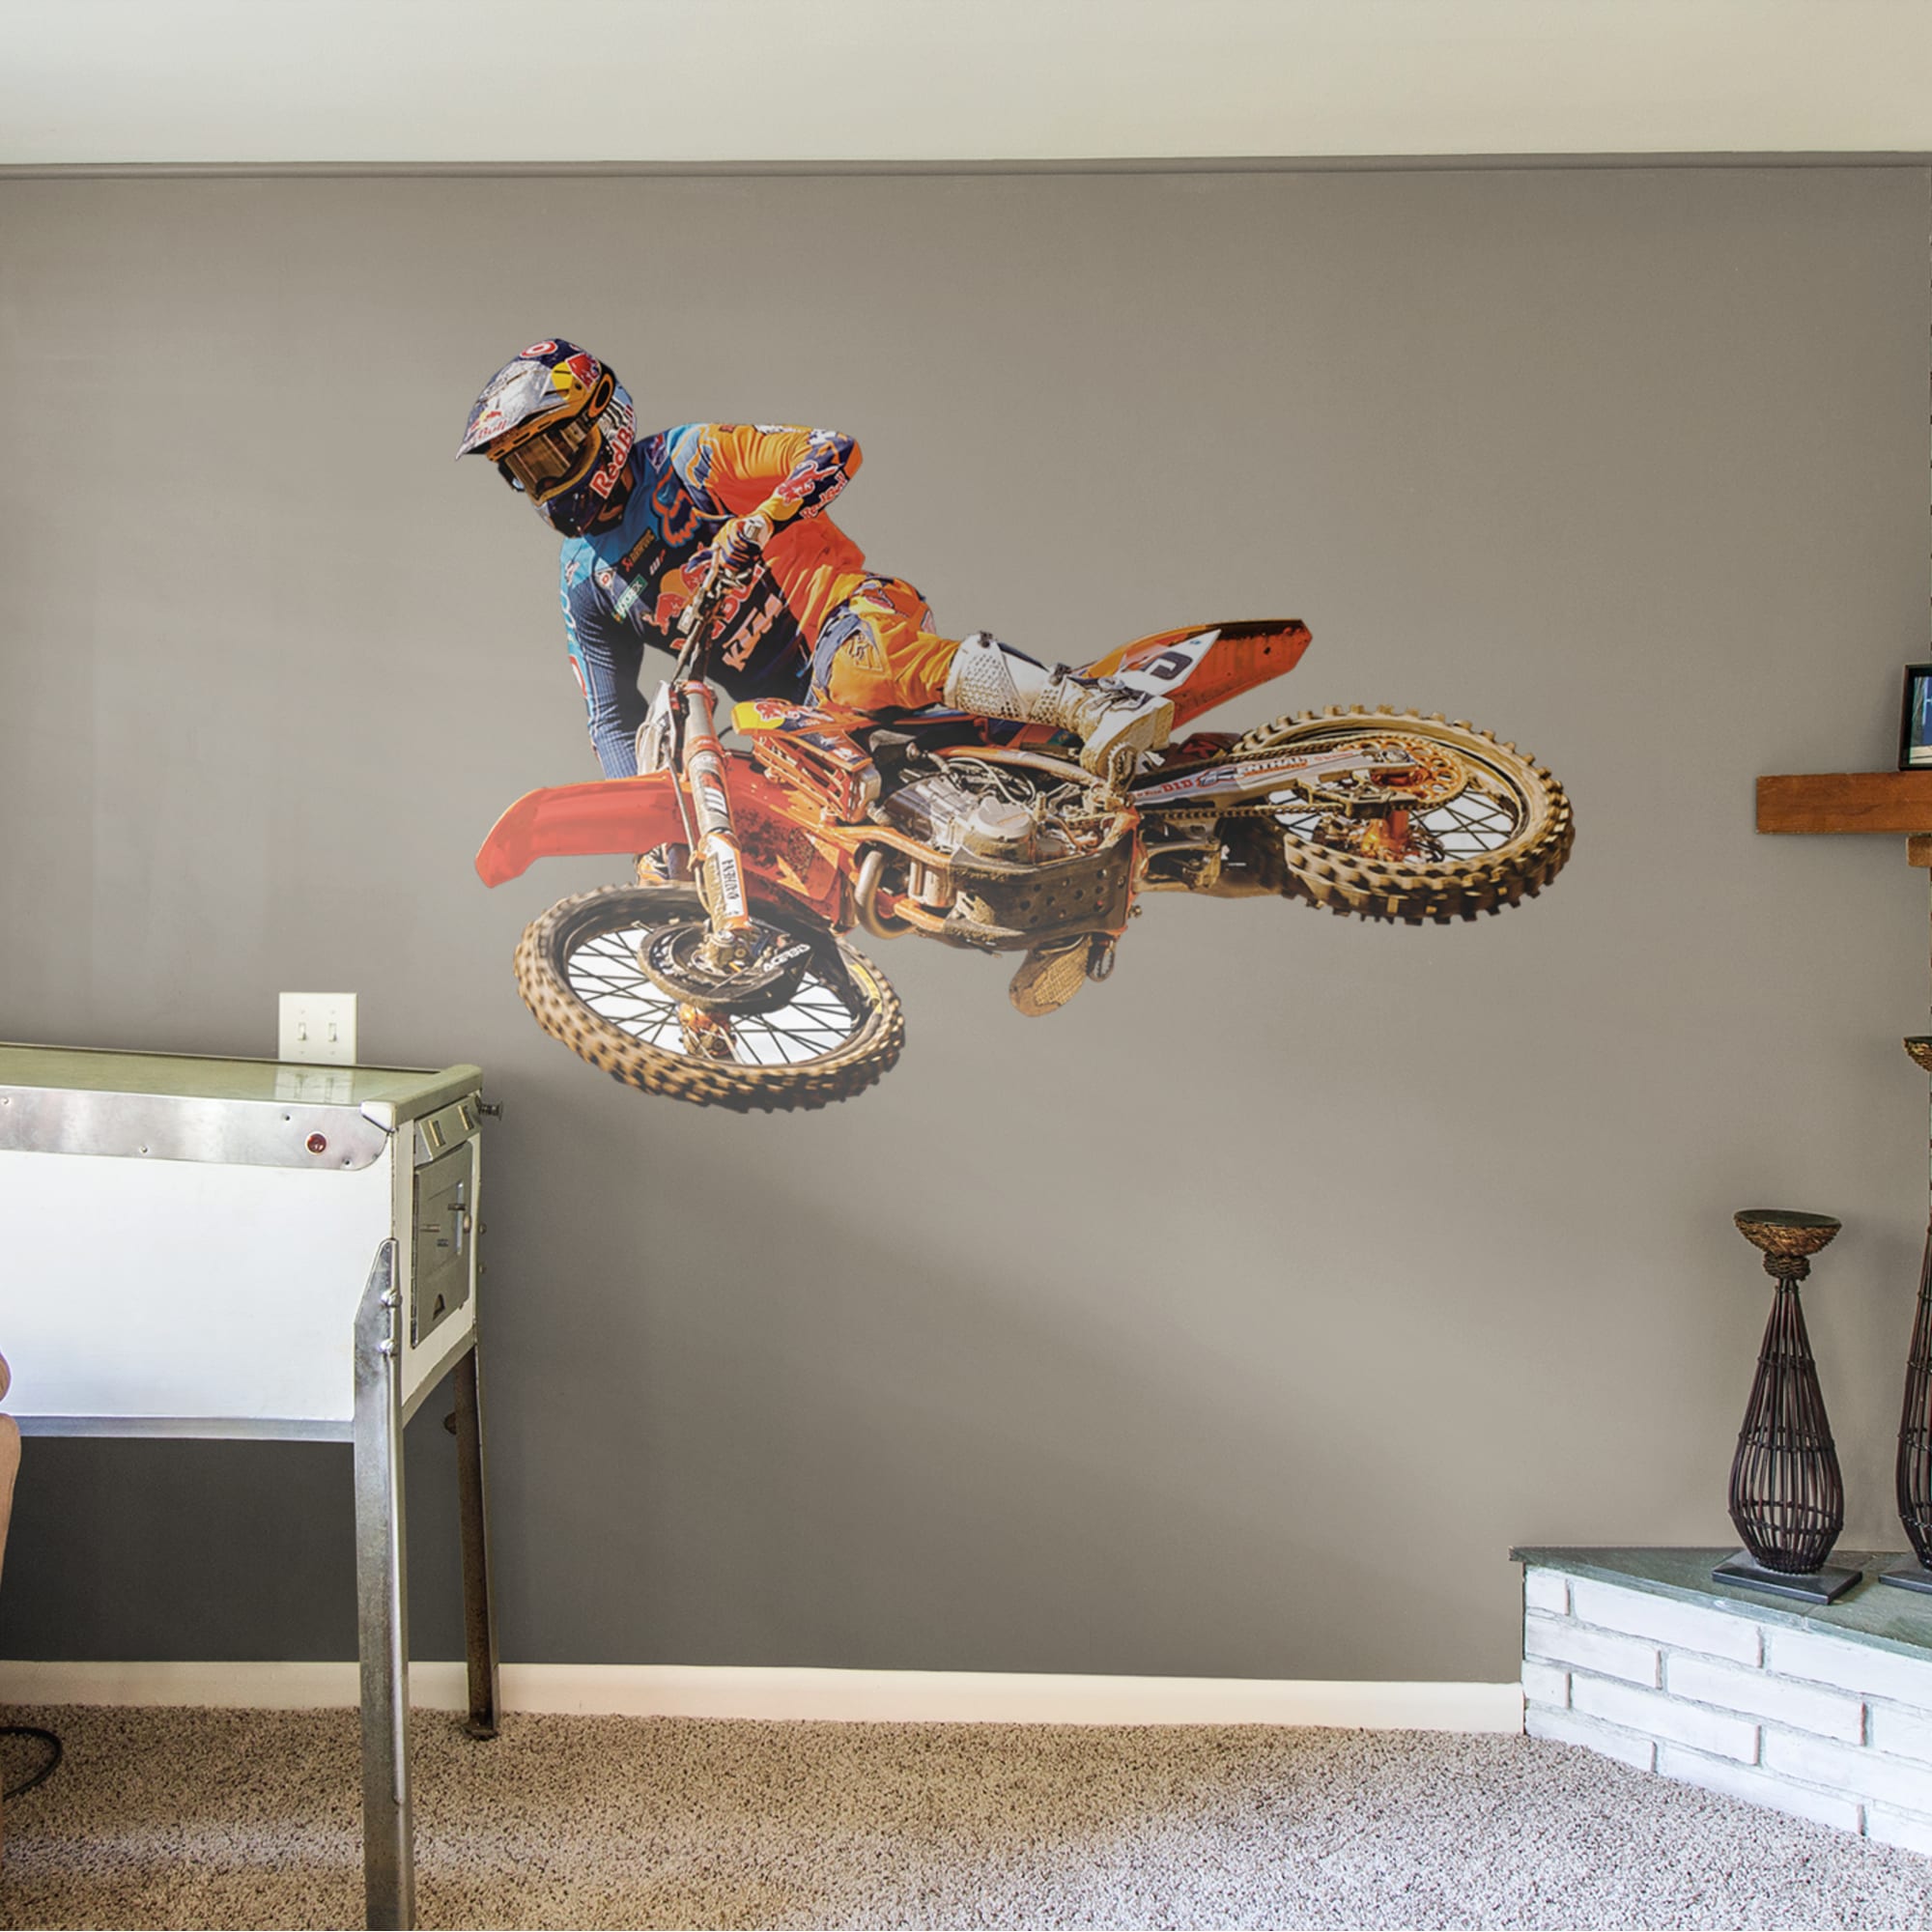 Ryan Dungey for Motocross - Officially Licensed Removable Wall Decal 75"W x 51"H by Fathead | Vinyl